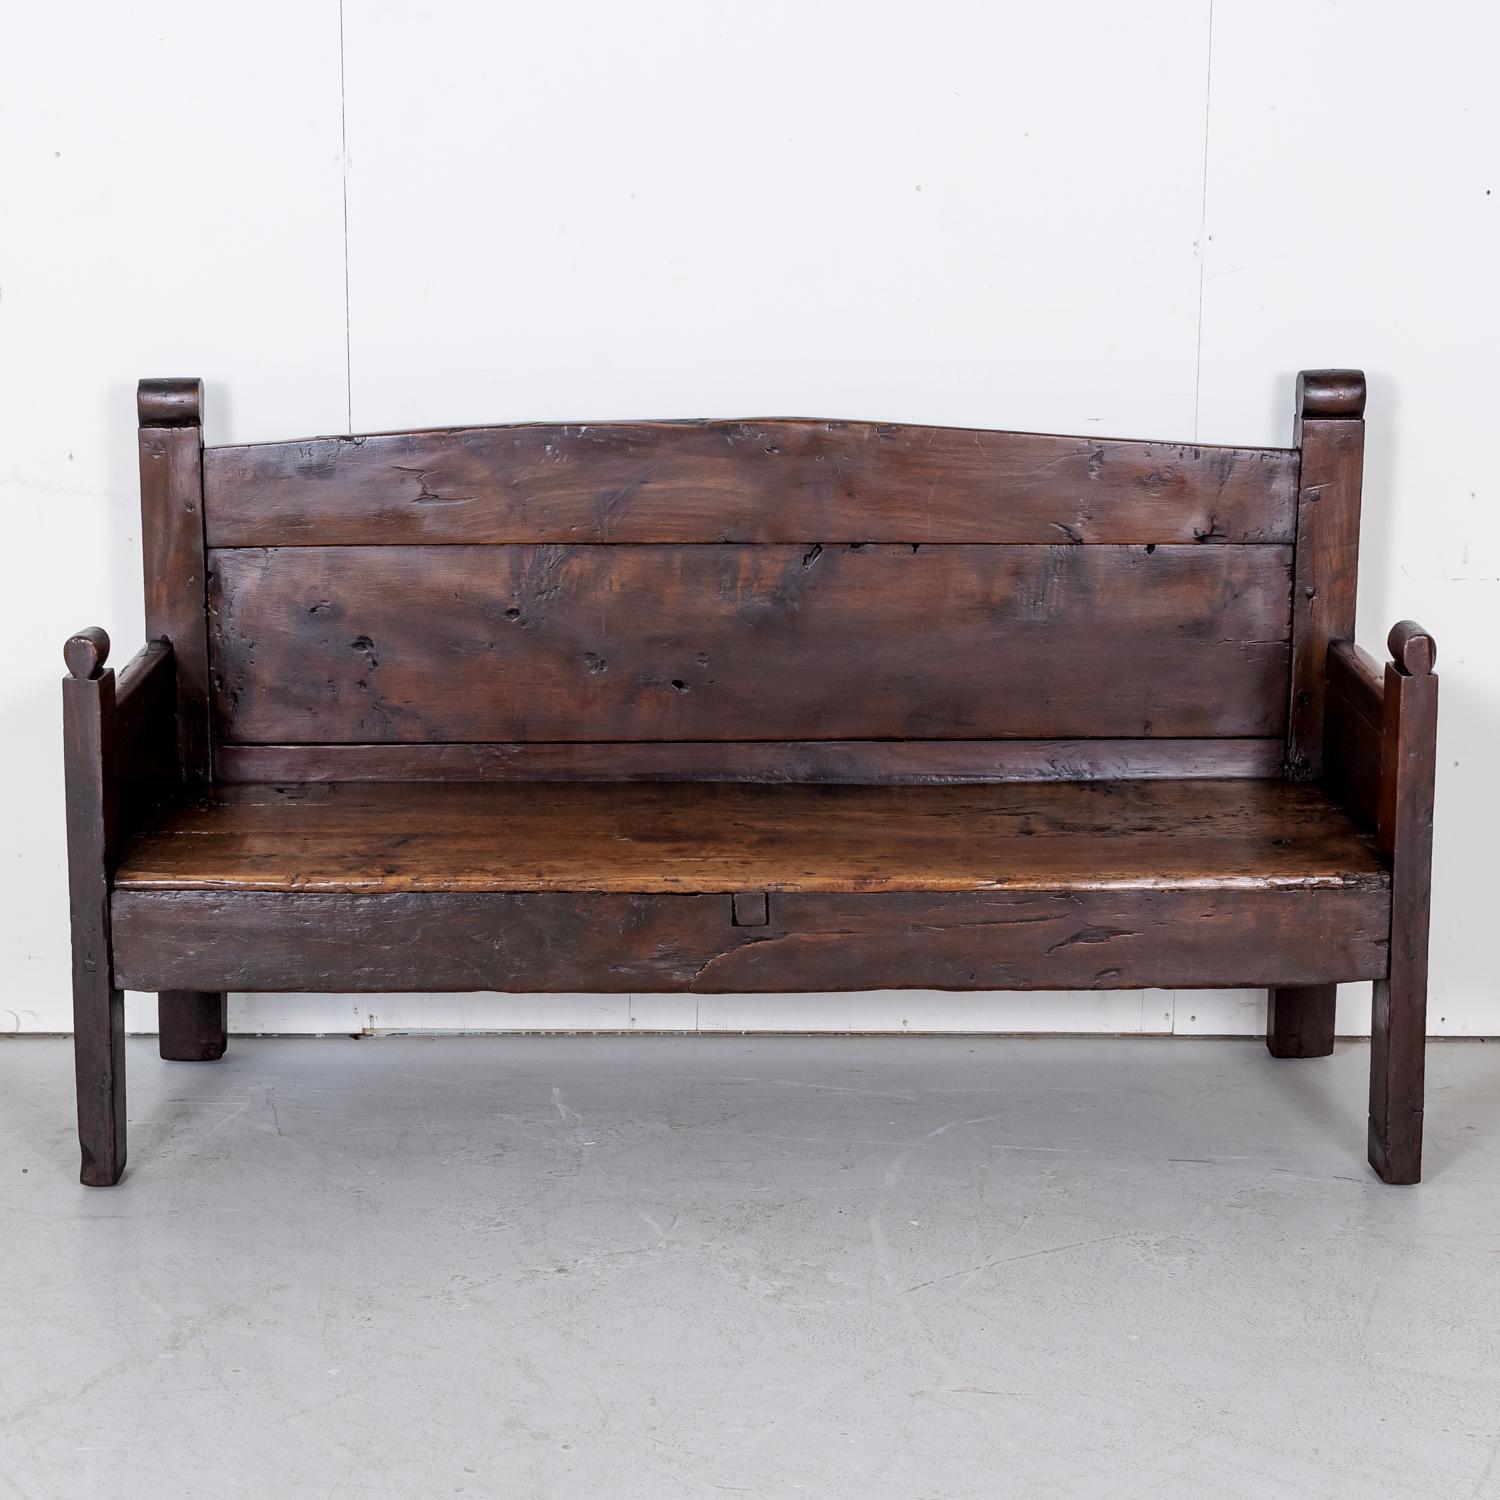 Rustic Mid-18th Century Spanish Walnut Bench with Arms 2